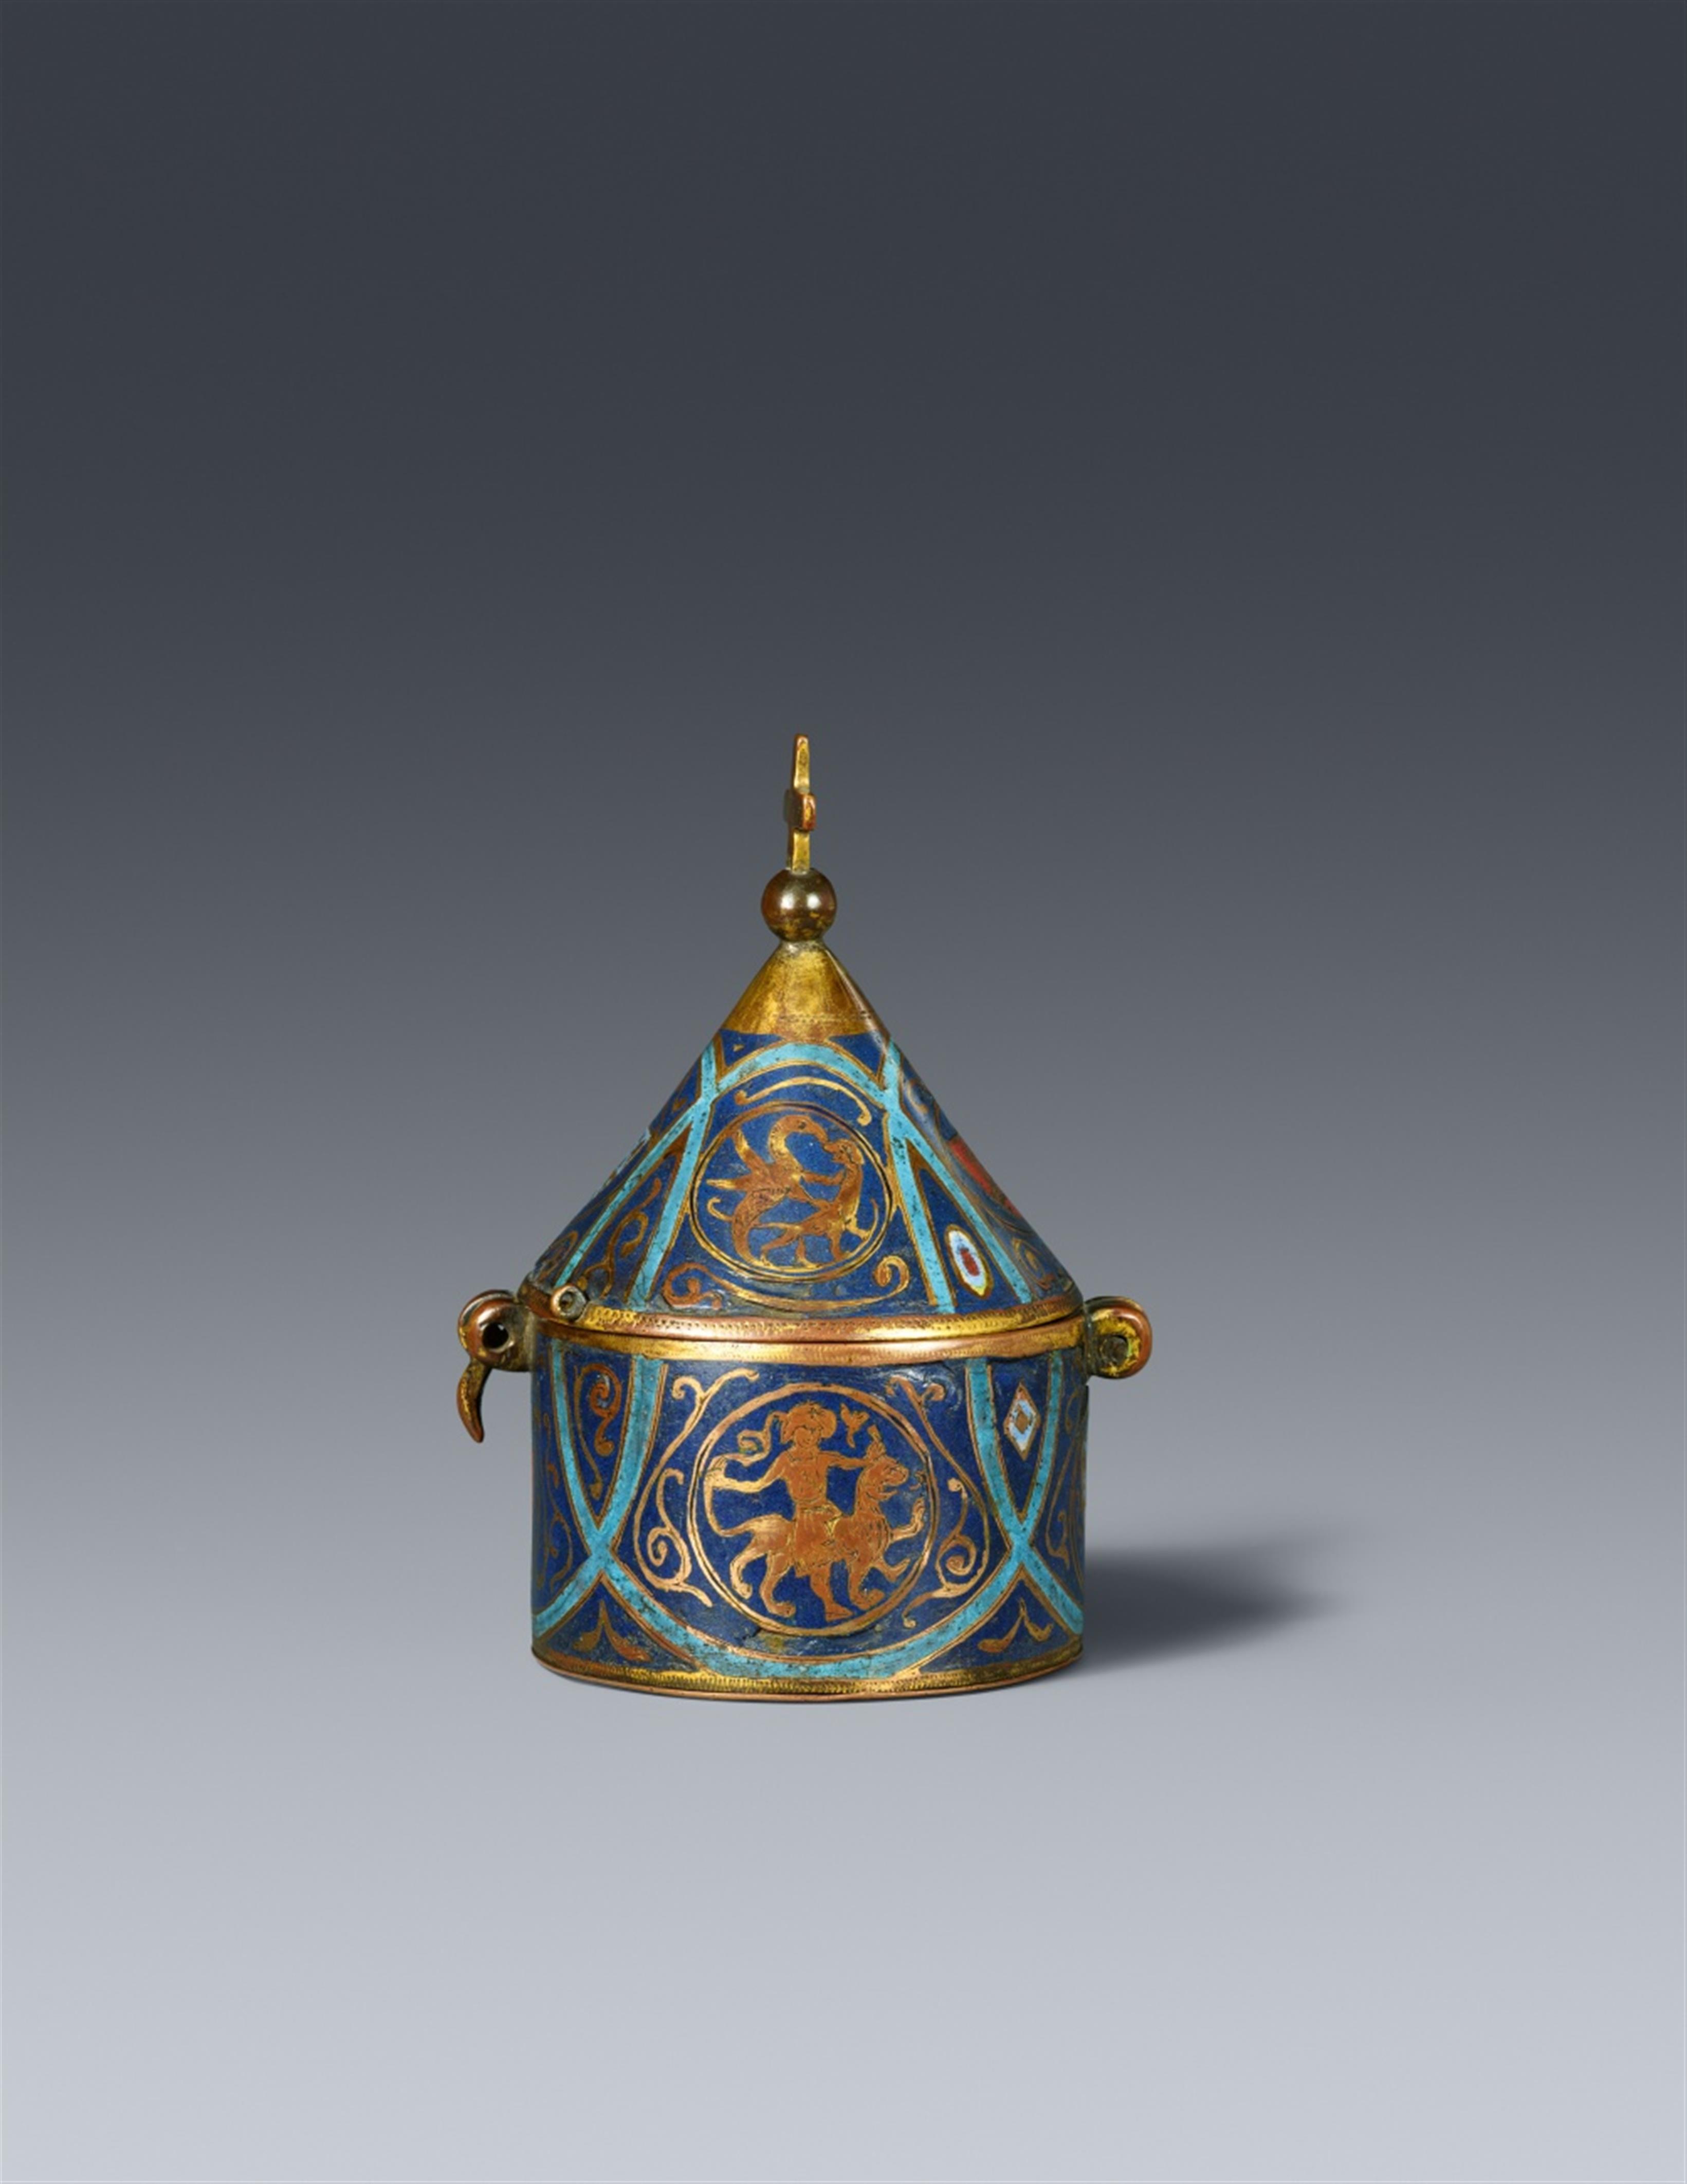 Limoges second half 13th century - A Limoges enamel pyx, second half 13th century - image-1